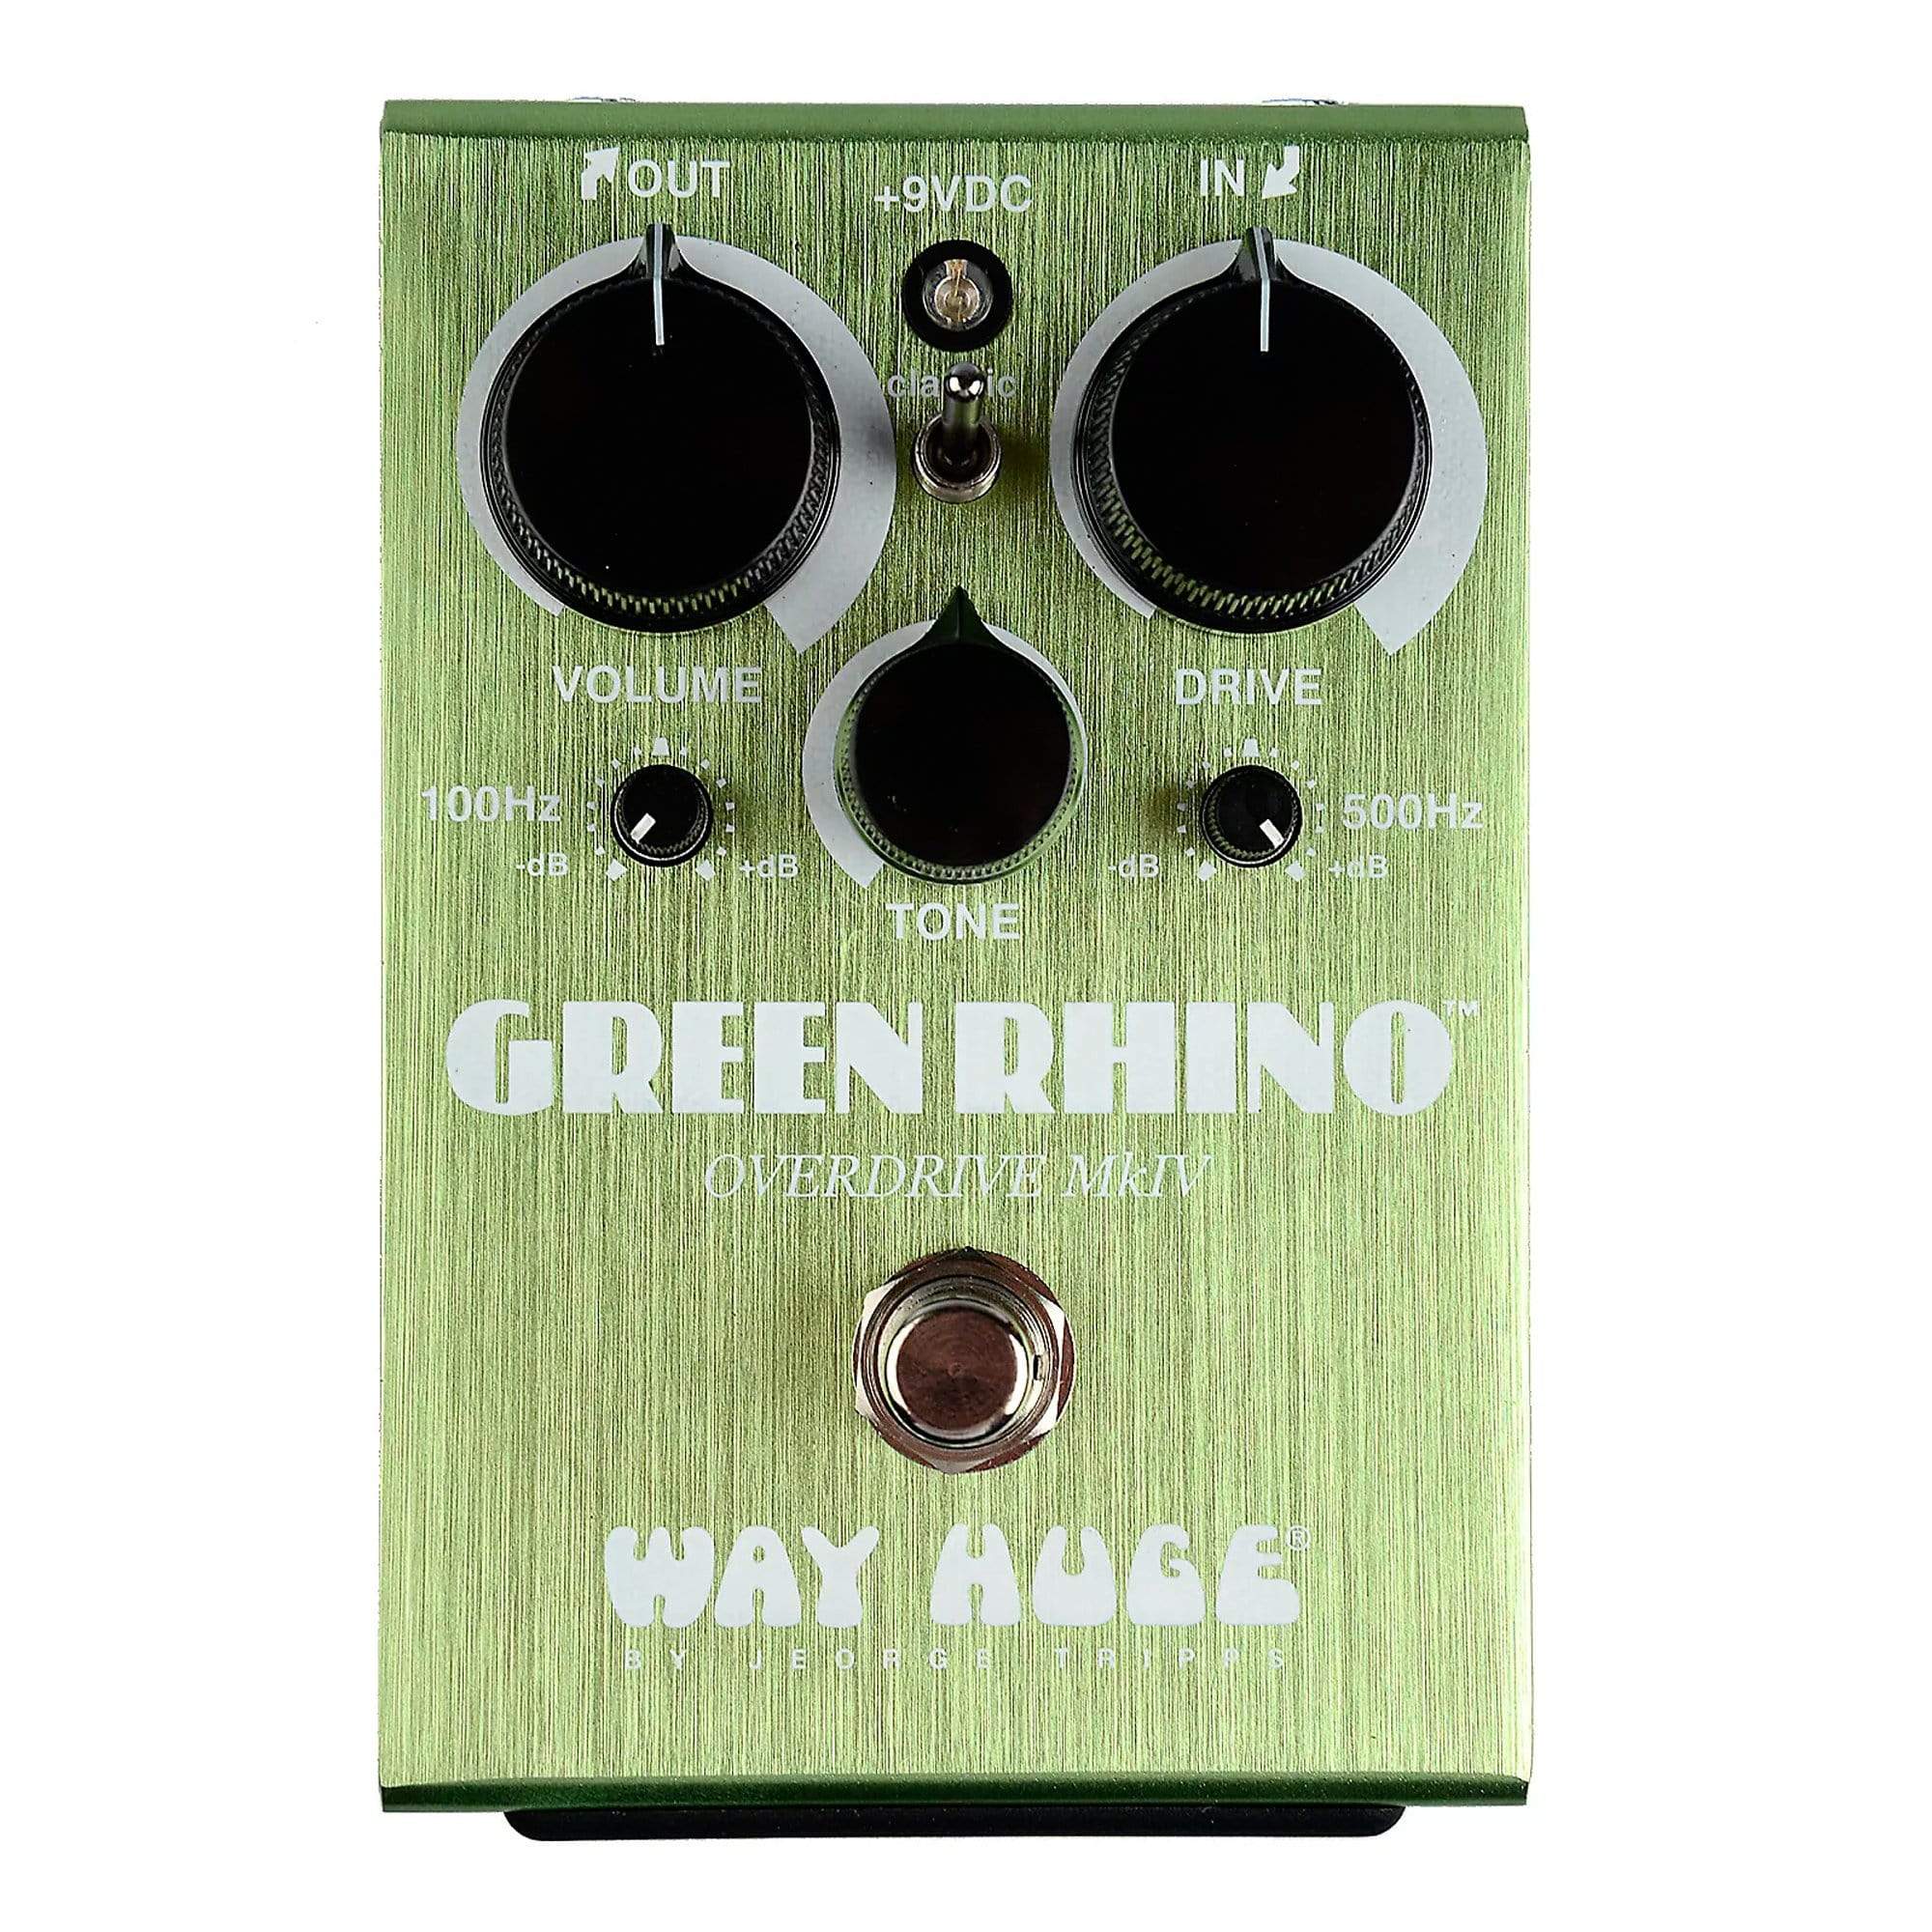 Way Huge WHE207 Green Rhino MkIV Overdrive Bundle w/ Truetone 1 Spot Space Saving 9v Adapter Effects and Pedals / Overdrive and Boost